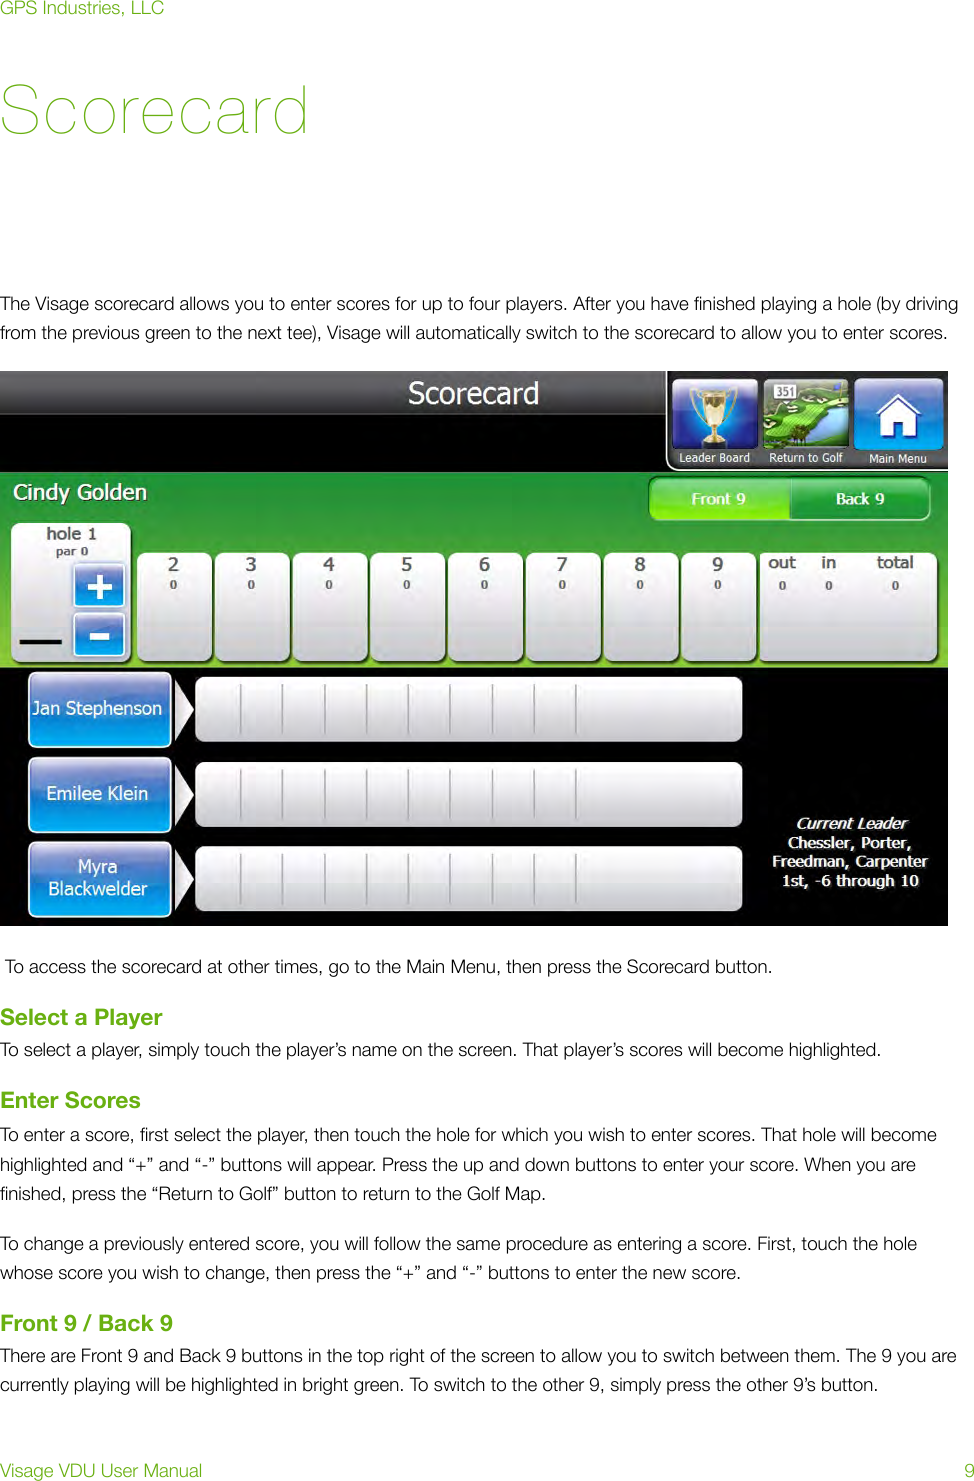 ScorecardThe Visage scorecard allows you to enter scores for up to four players. After you have ﬁnished playing a hole (by driving from the previous green to the next tee), Visage will automatically switch to the scorecard to allow you to enter scores. To access the scorecard at other times, go to the Main Menu, then press the Scorecard button.Select a PlayerTo select a player, simply touch the player’s name on the screen. That player’s scores will become highlighted.Enter ScoresTo enter a score, ﬁrst select the player, then touch the hole for which you wish to enter scores. That hole will become highlighted and “+” and “-” buttons will appear. Press the up and down buttons to enter your score. When you are ﬁnished, press the “Return to Golf” button to return to the Golf Map.To change a previously entered score, you will follow the same procedure as entering a score. First, touch the hole whose score you wish to change, then press the “+” and “-” buttons to enter the new score.Front 9 / Back 9There are Front 9 and Back 9 buttons in the top right of the screen to allow you to switch between them. The 9 you are currently playing will be highlighted in bright green. To switch to the other 9, simply press the other 9’s button.GPS Industries, LLCVisage VDU User Manual!9